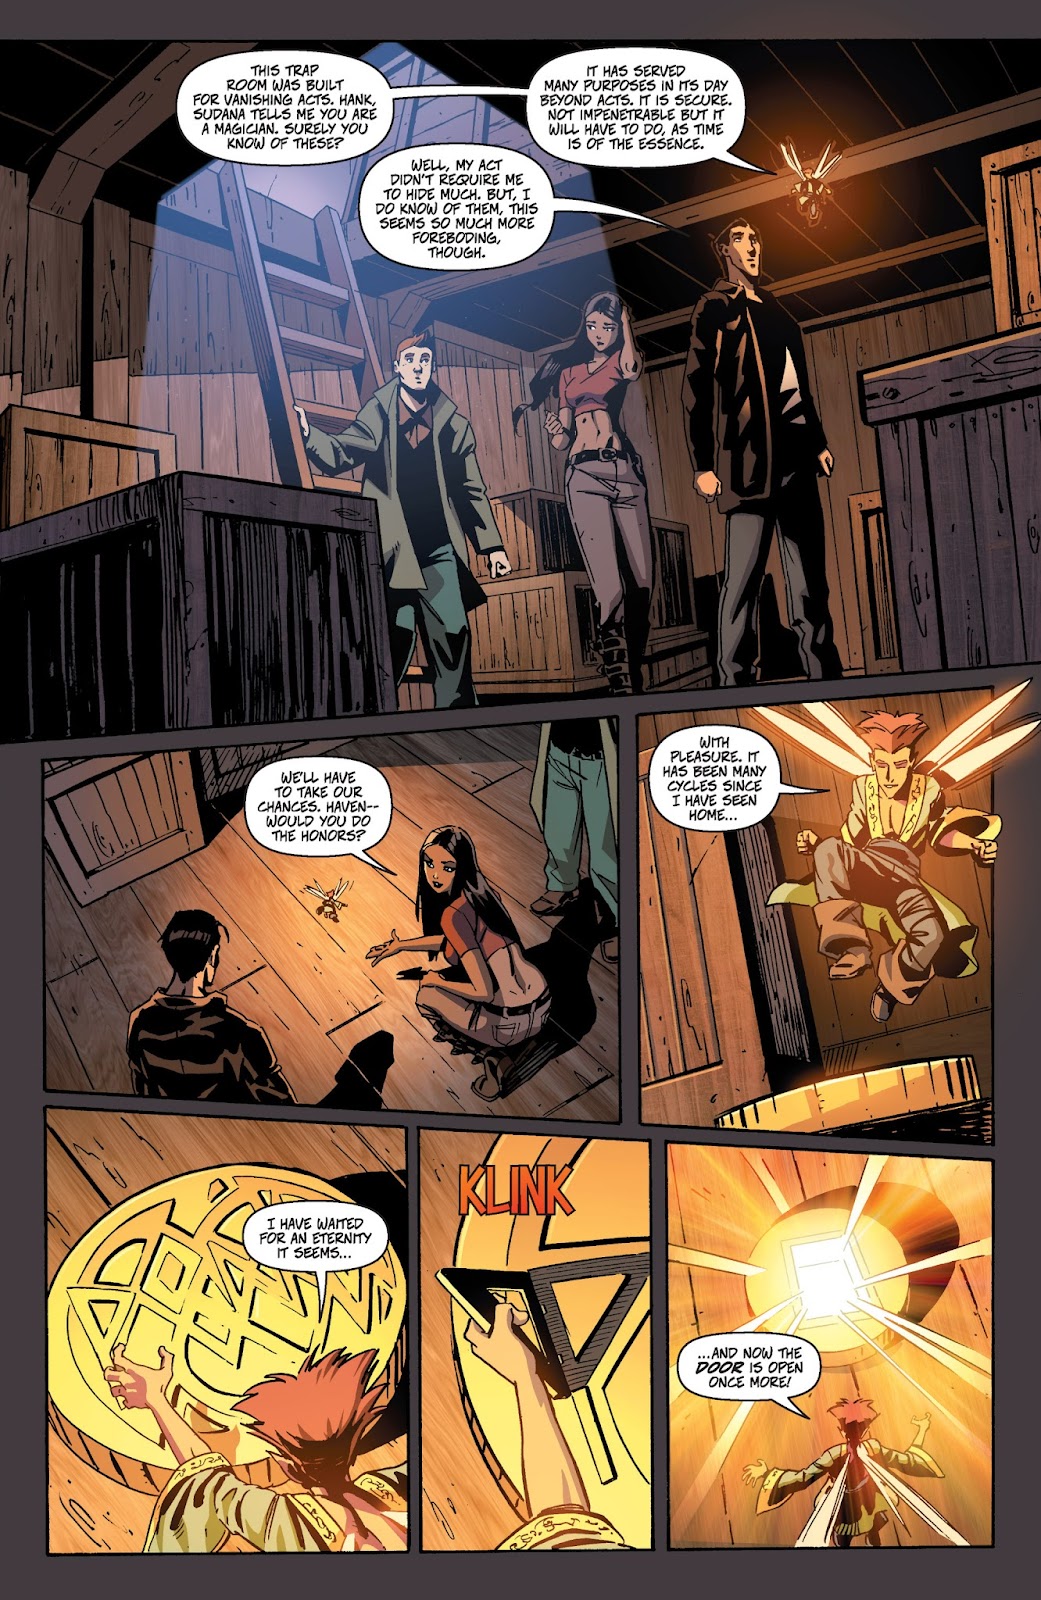 Charismagic (2013) issue 3 - Page 13